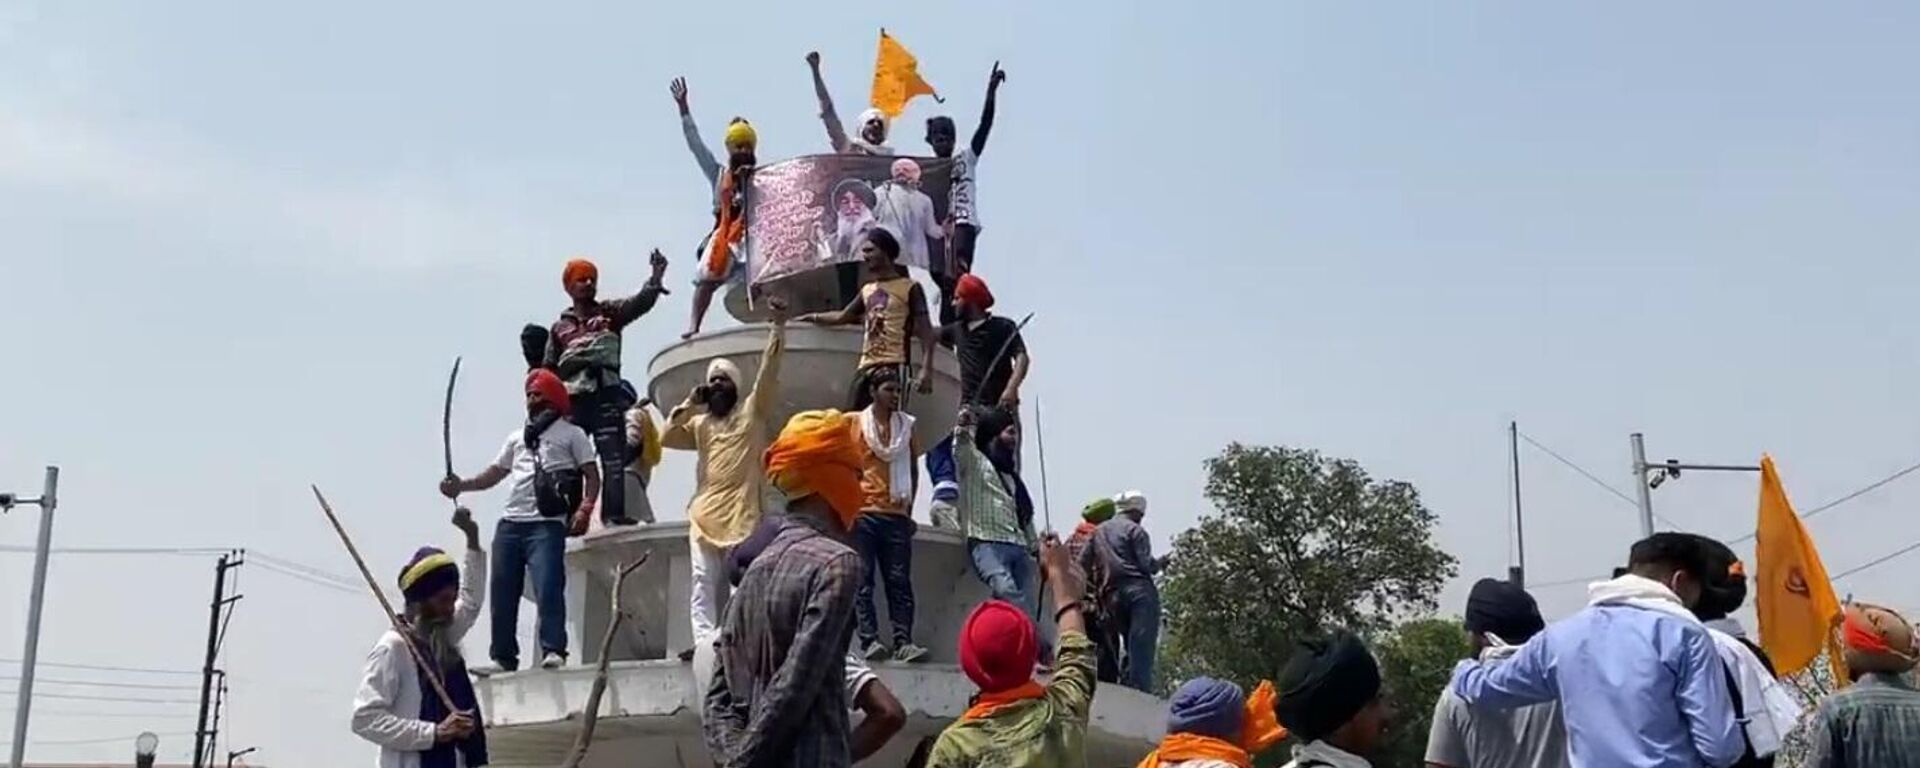 Open call for Khalistan in Patiala, Punjab! Hindu Nationalists and Khalistan supporting Sikhs have clashed today in India and the Khalistan movement is not anymore limited to a group of Sikhs in Canada or UK! - Sputnik International, 1920, 03.11.2022